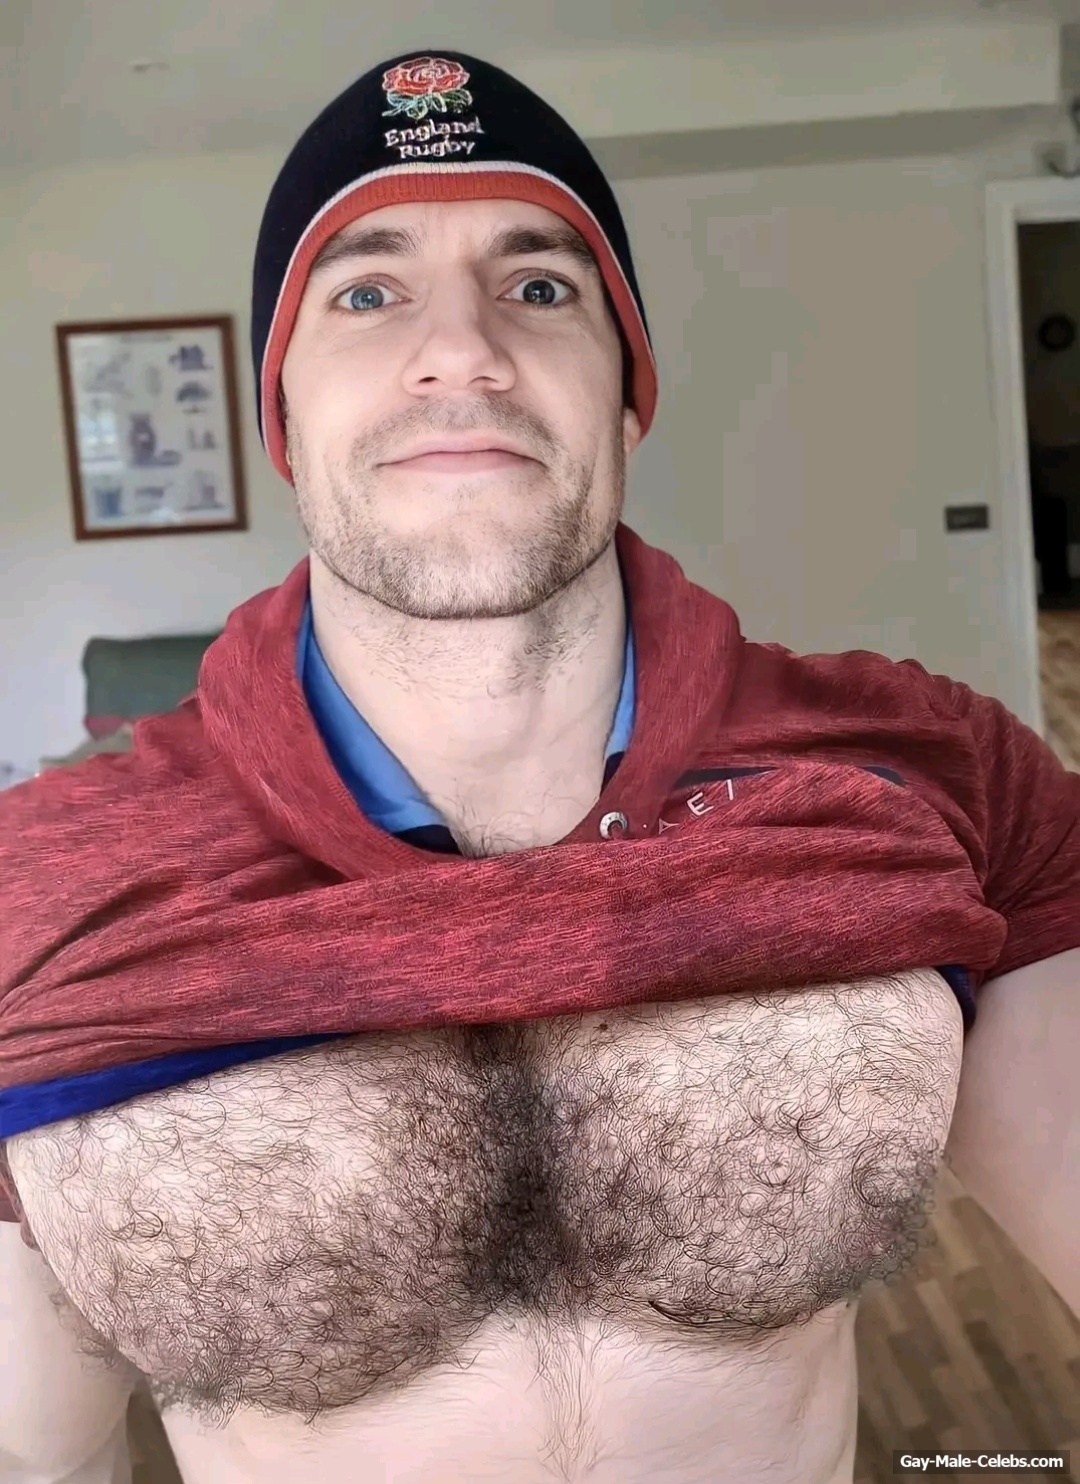 Henry Cavill Shows Off His Muscle Hairy Chest